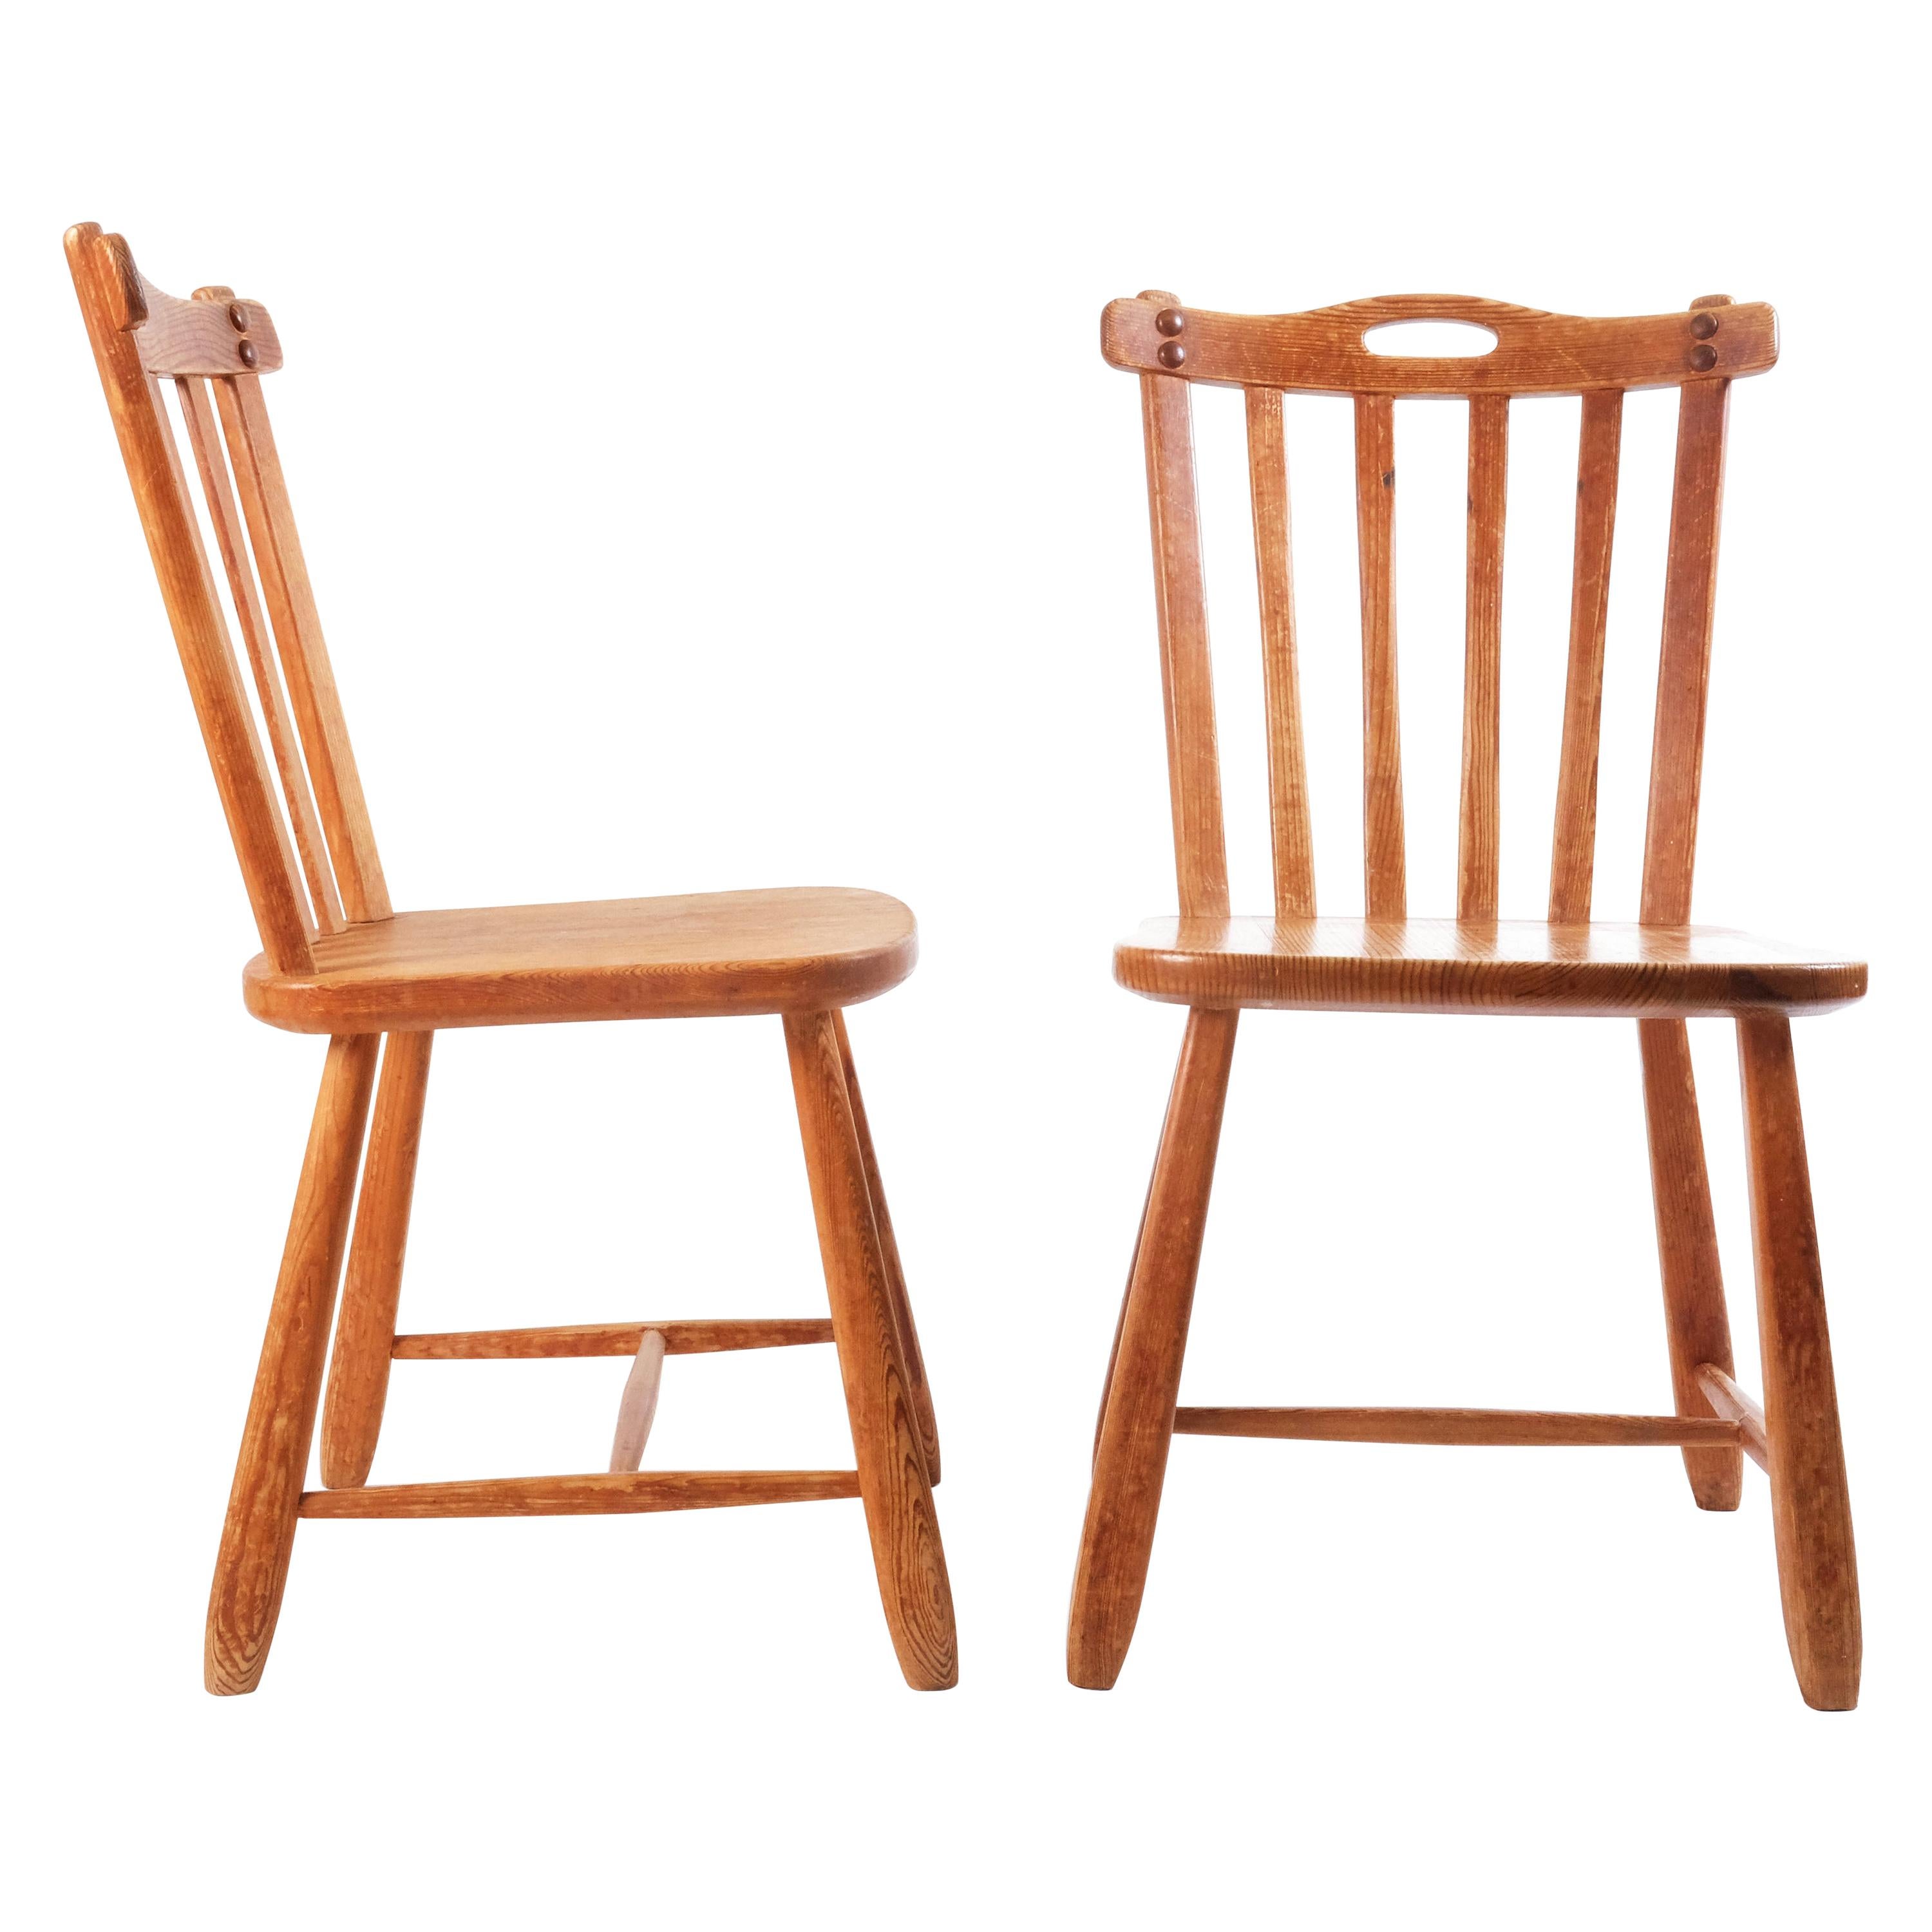 Two Swedish Sport Cabin Chairs in Pine by David Rosén for NK, Sweden